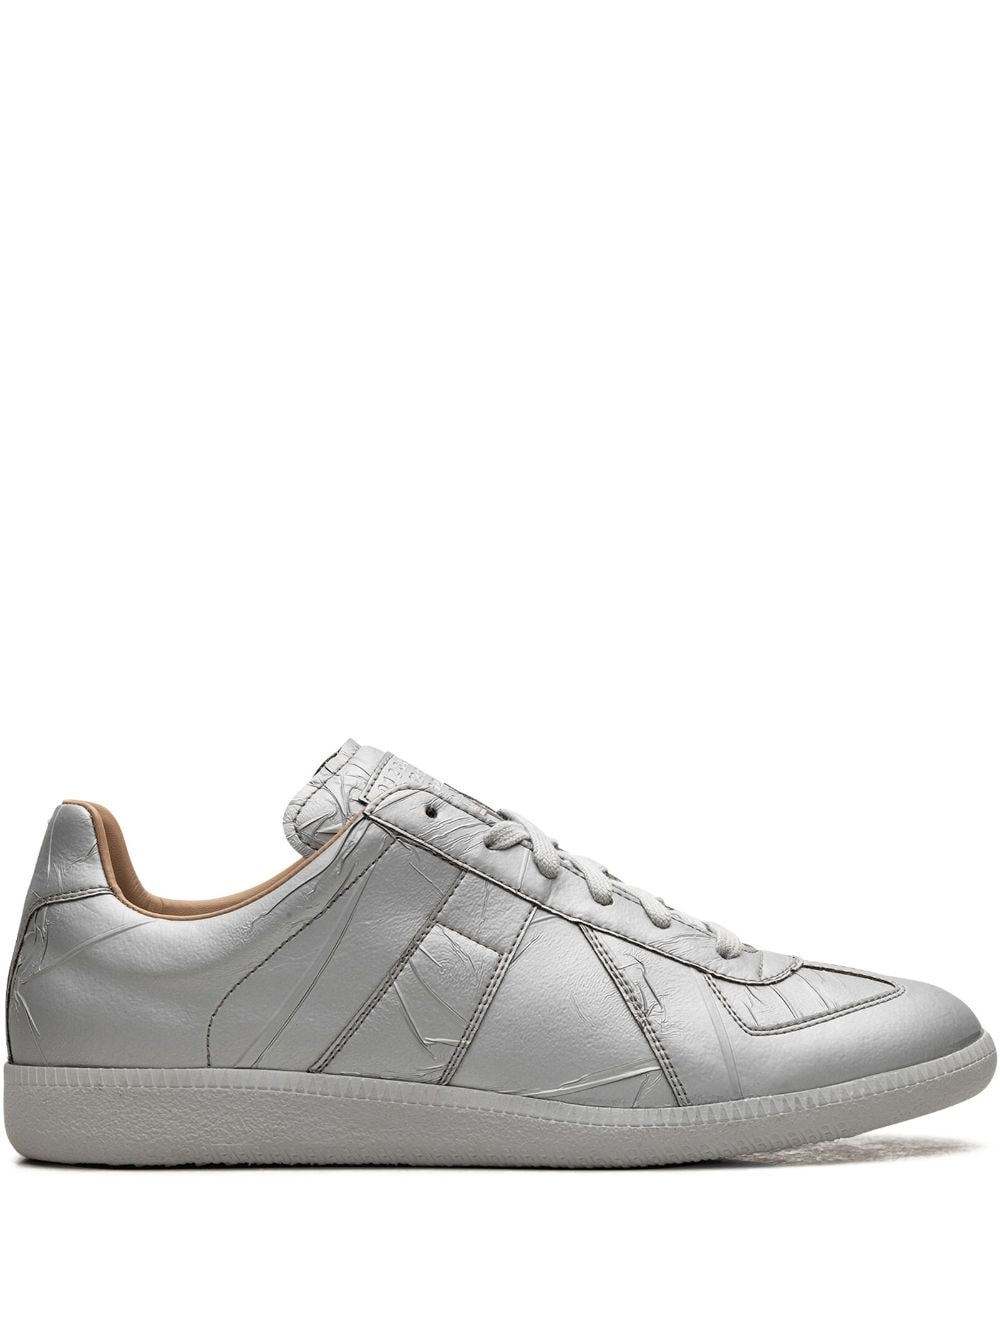 Maison Margiela Replica "Silver Cracked" low-top sneakers